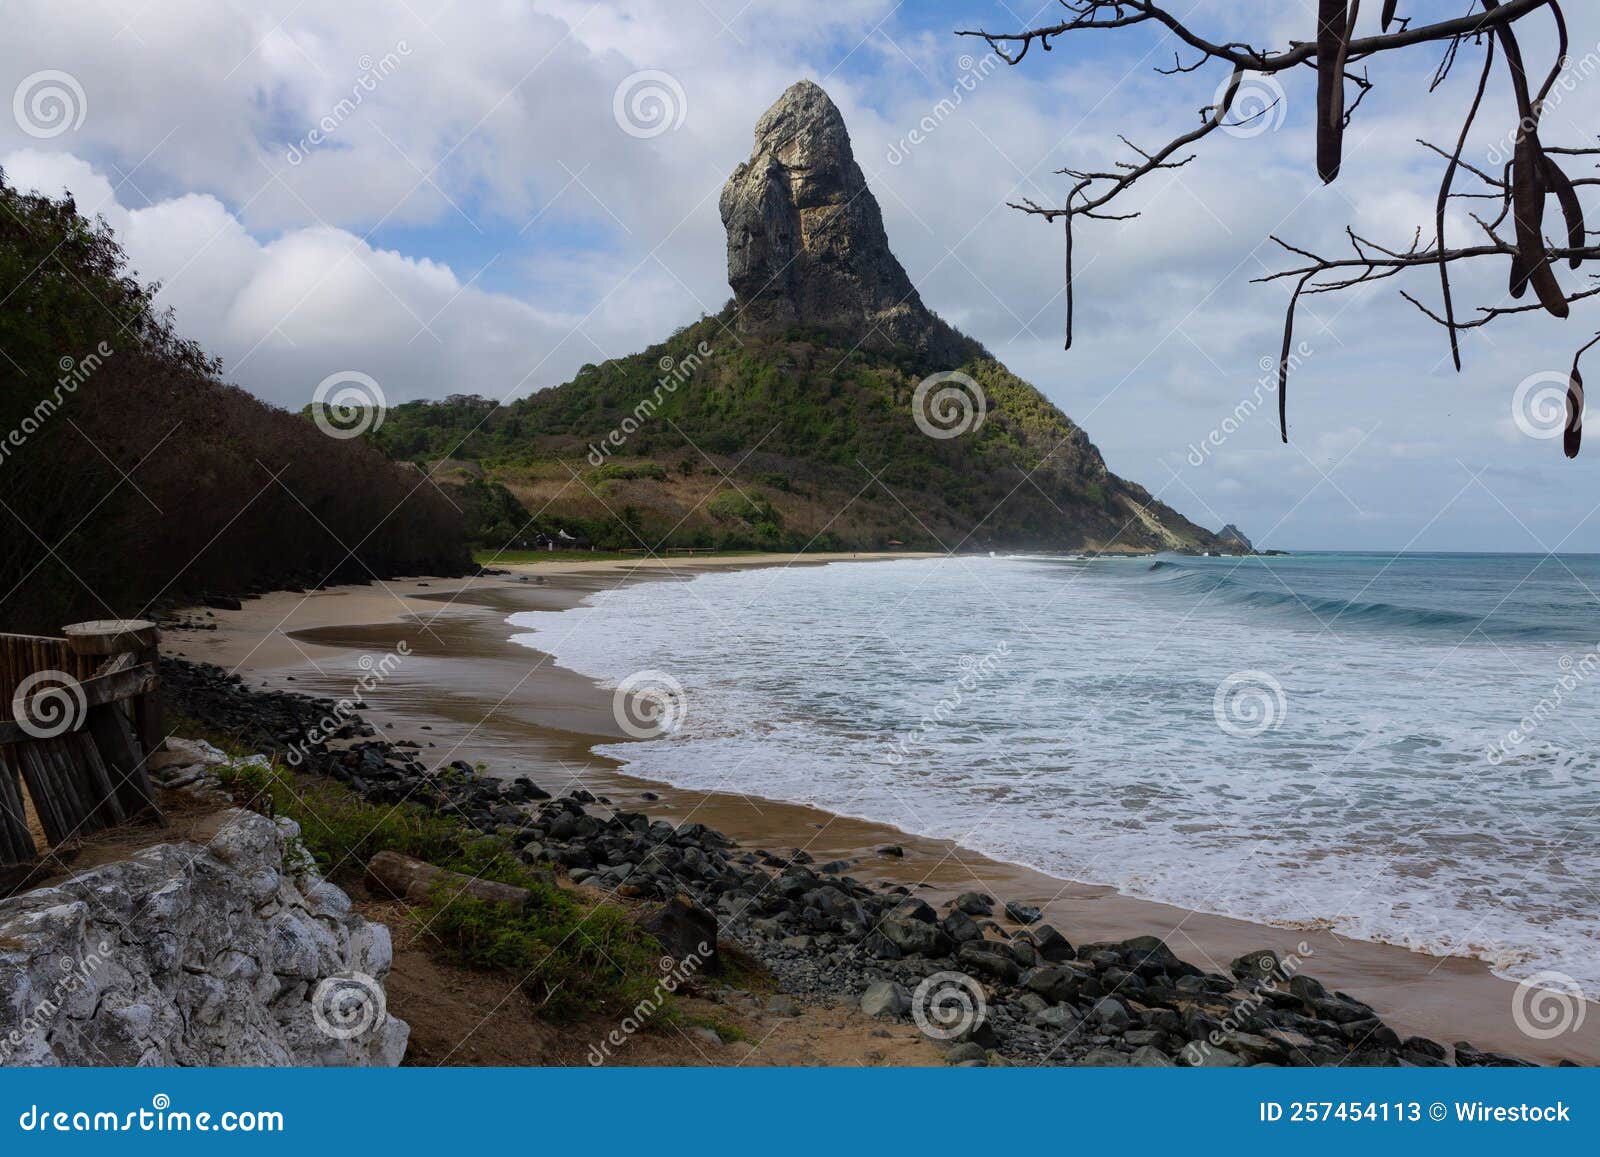 meio beach in brazil with a rocky shore on a bright sunny day